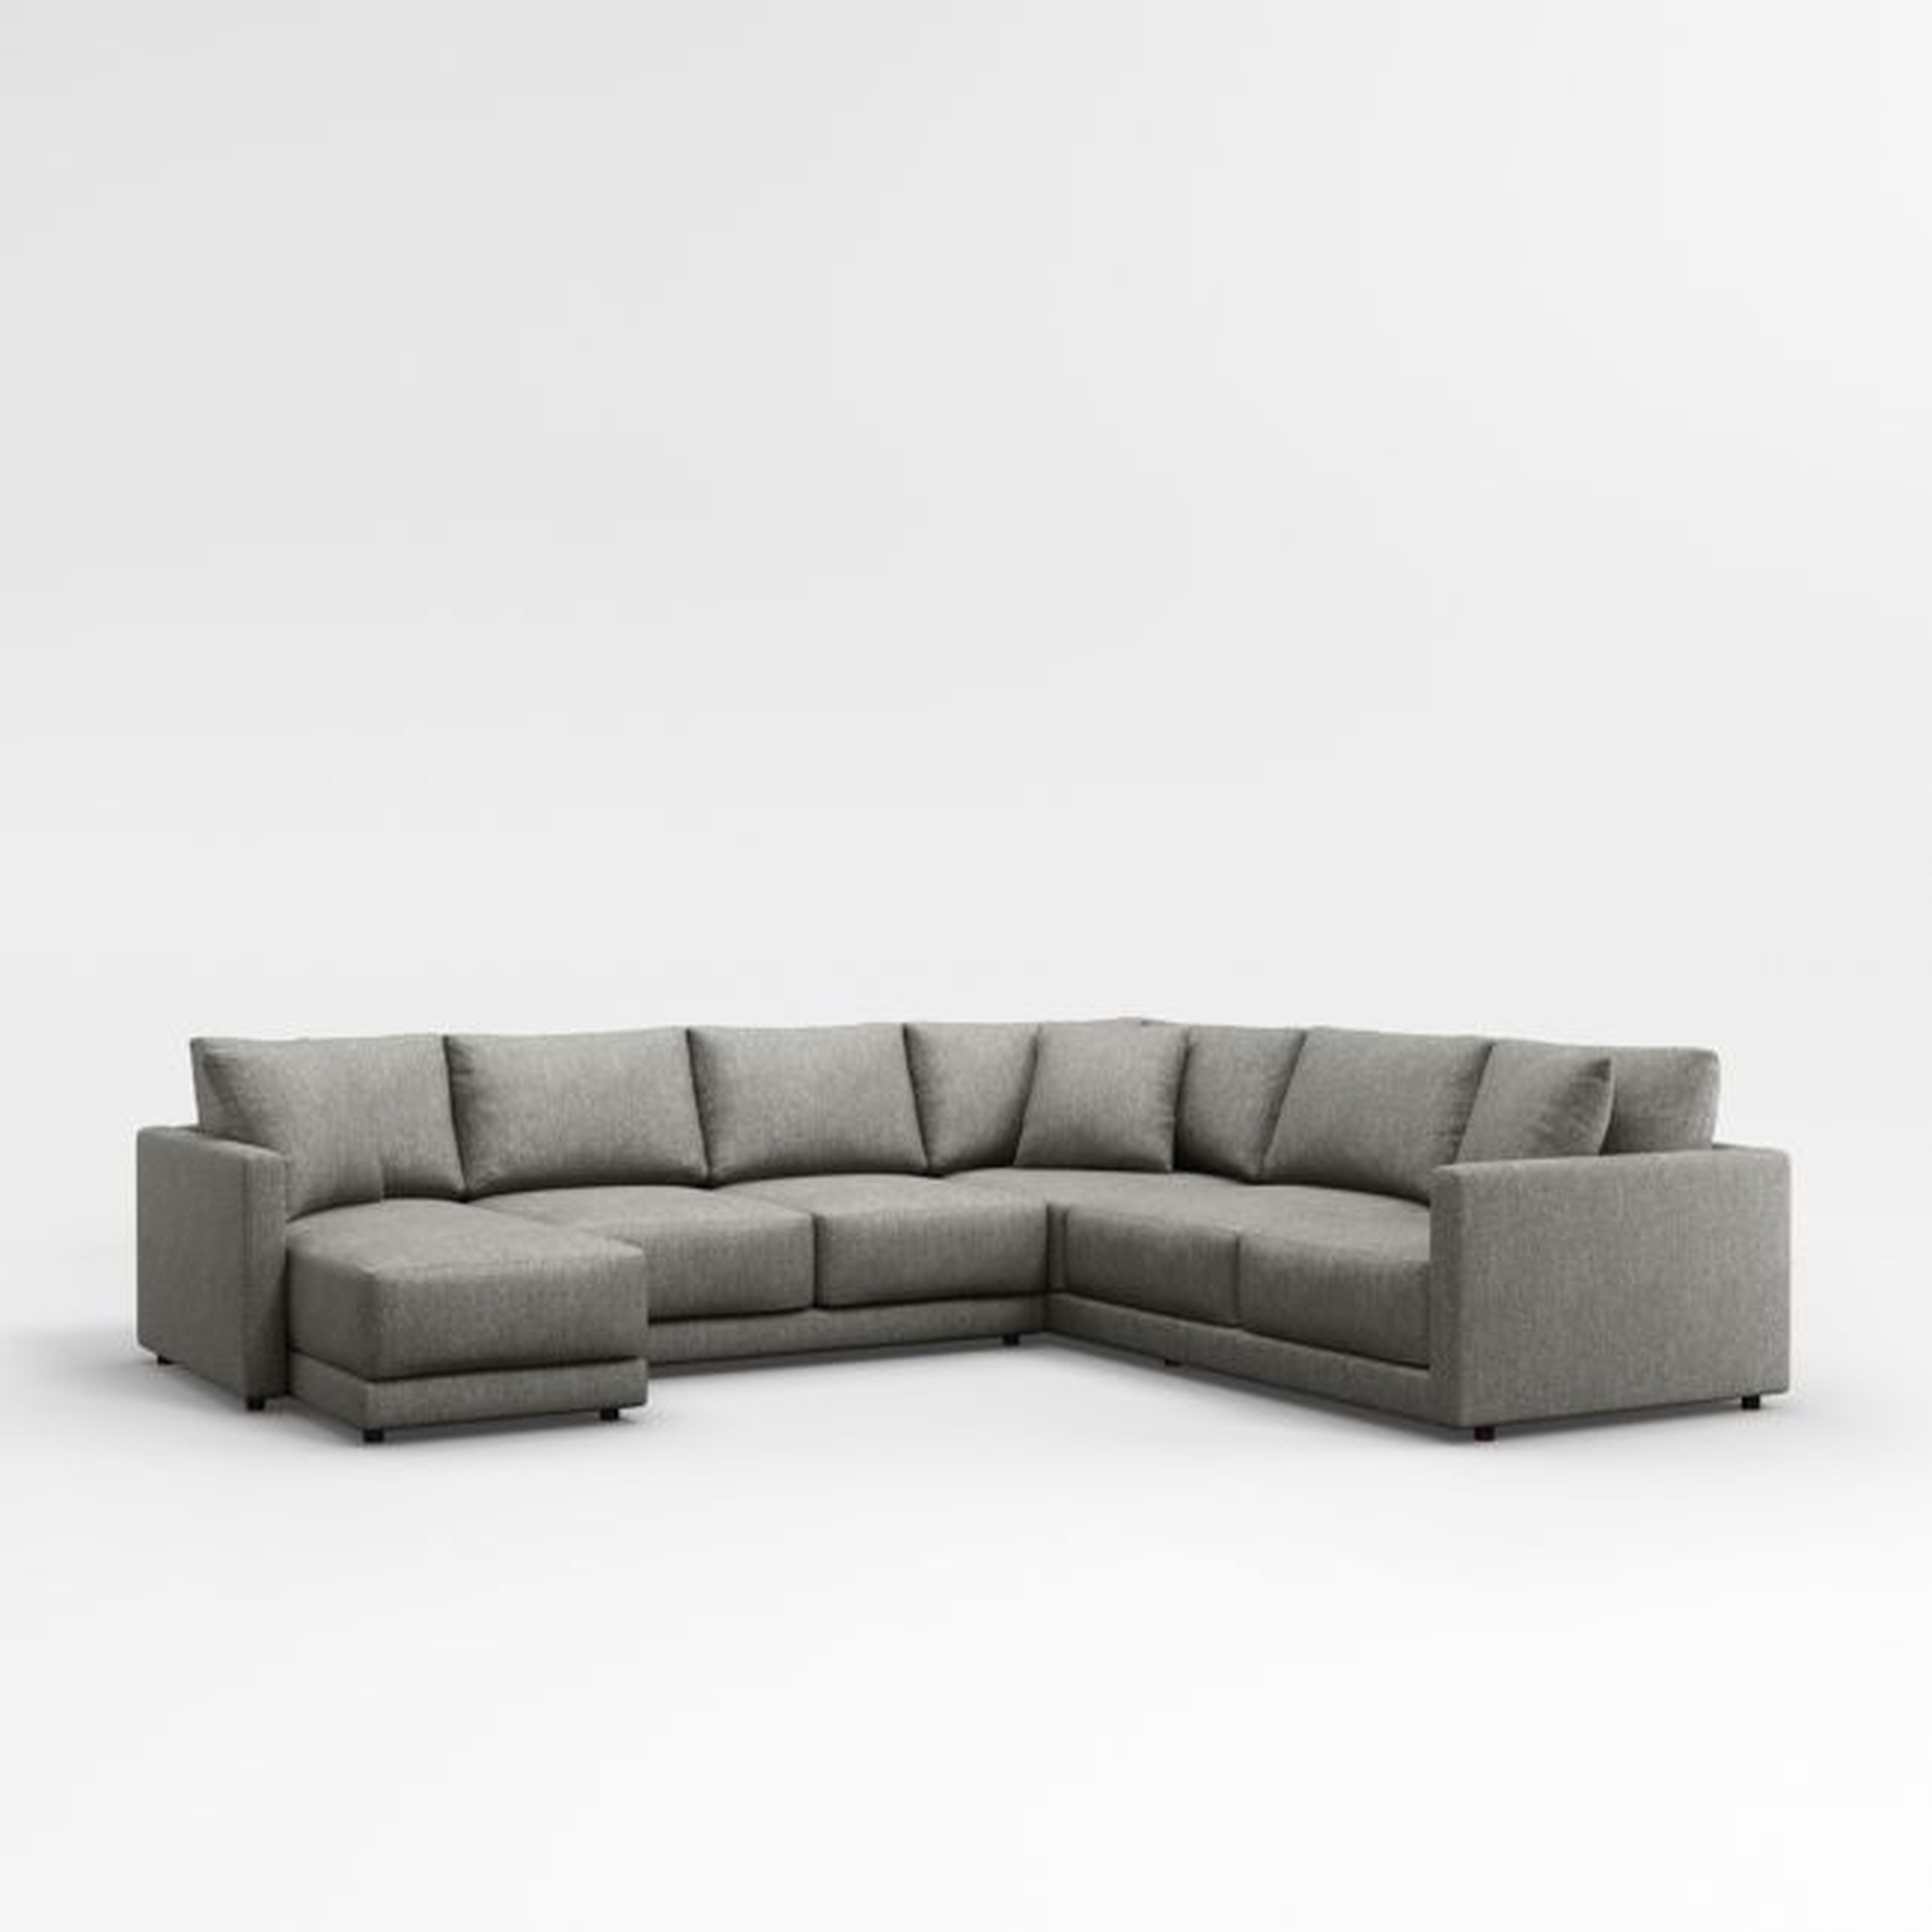 Gather Deep 3-Piece U-Shaped Sectional Sofa with Left-Arm Chaise - Crate and Barrel